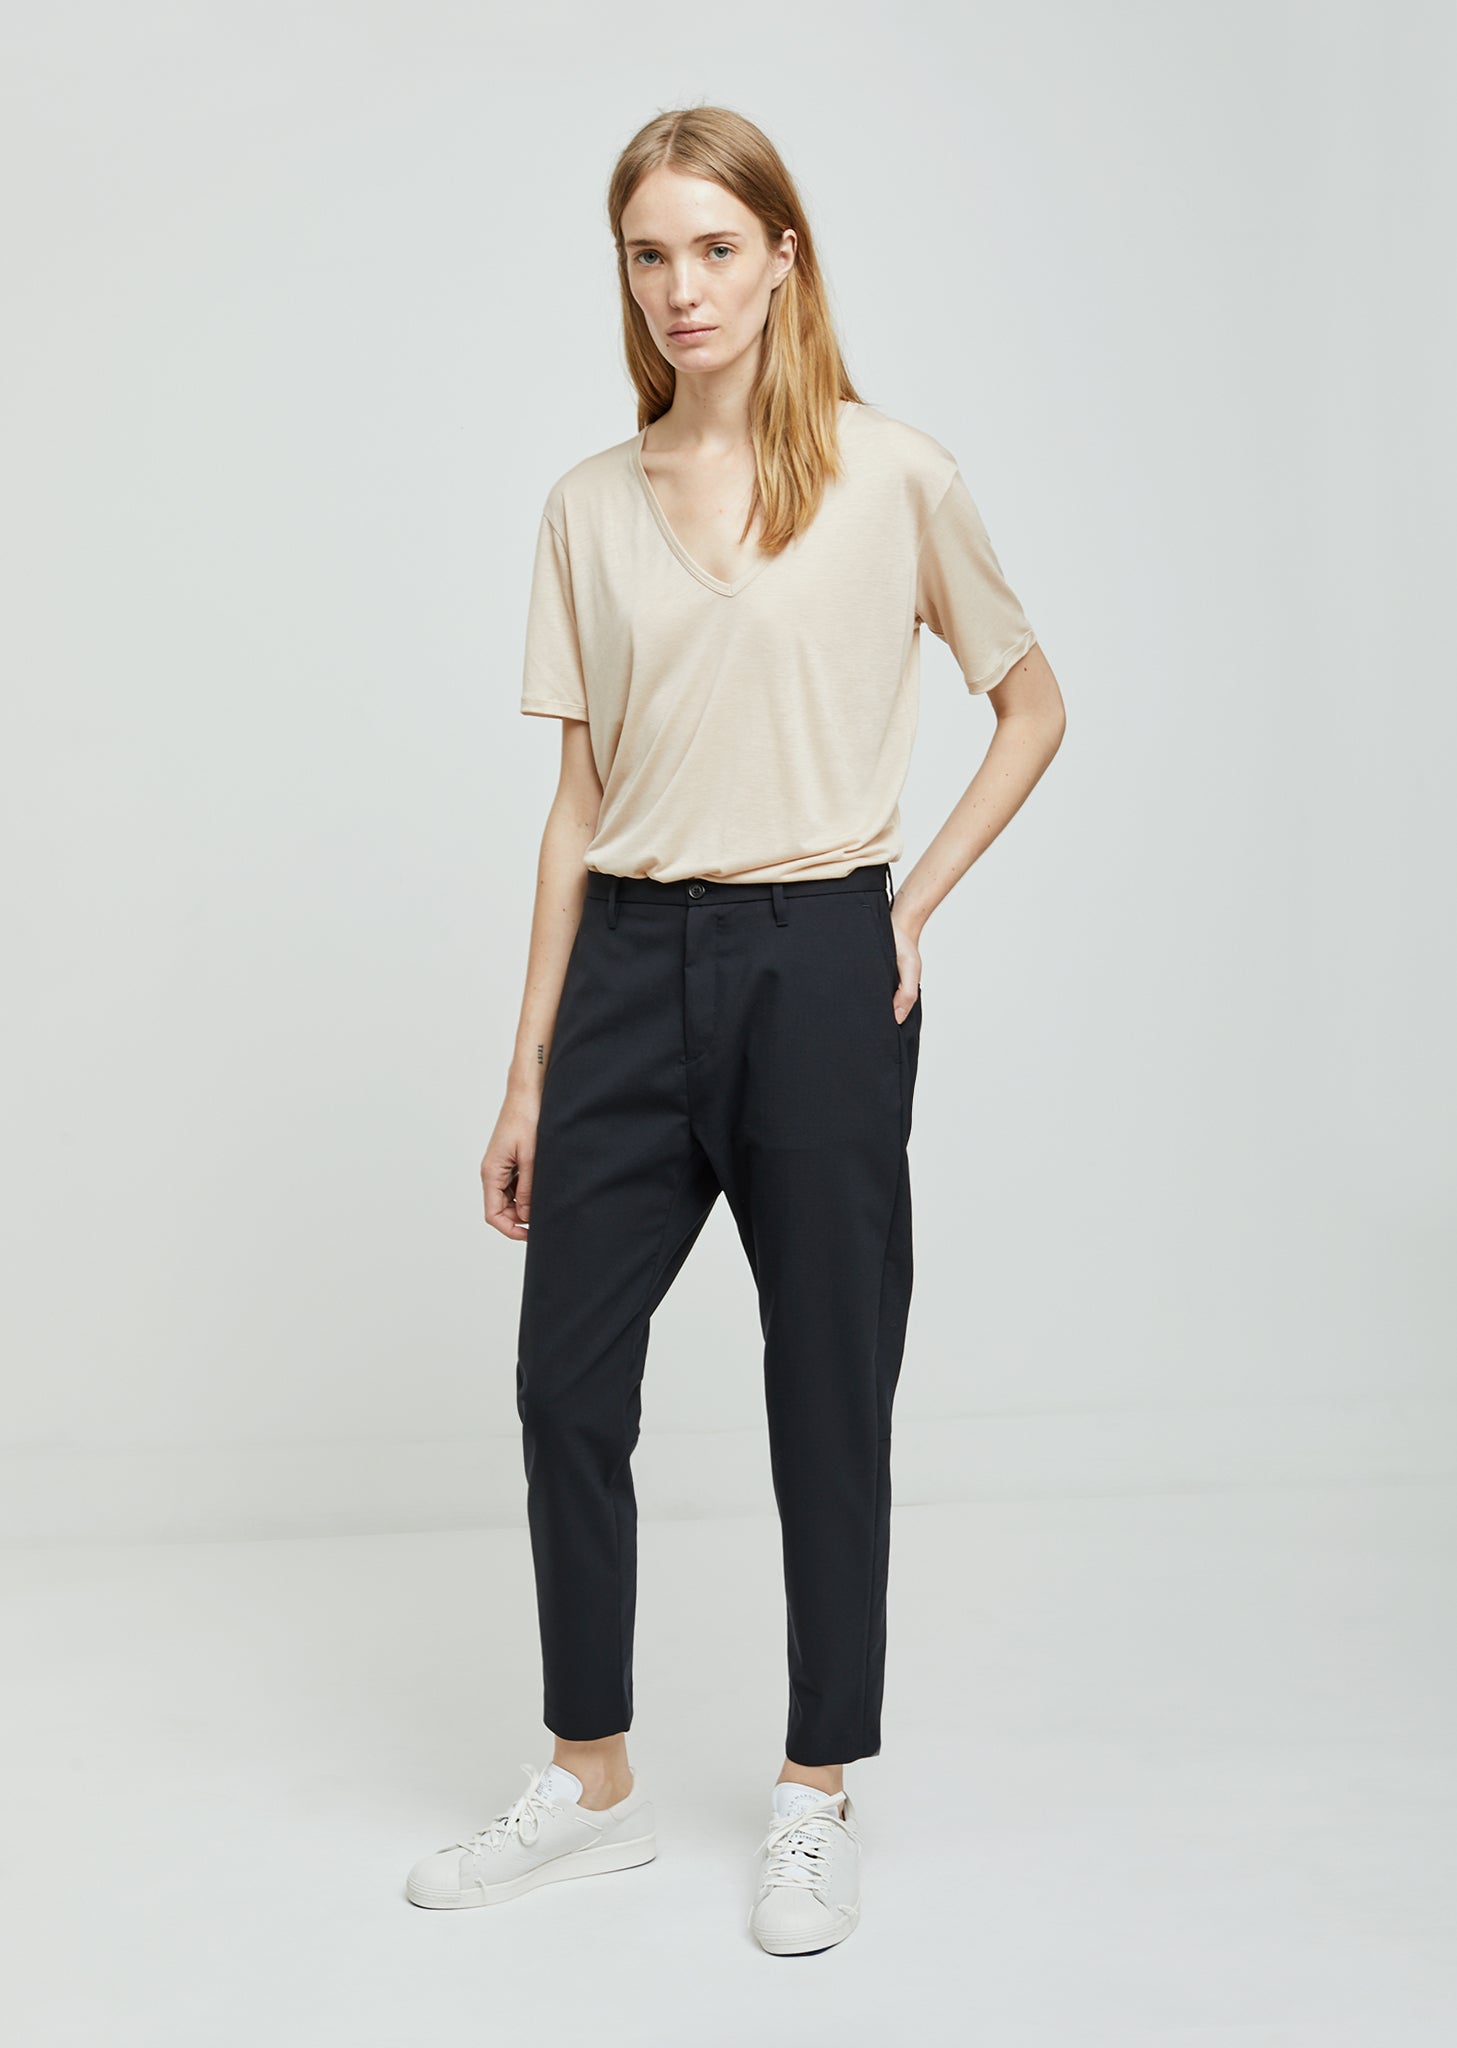 HOPE Blue Criss Trousers | MILANSTYLE.COM